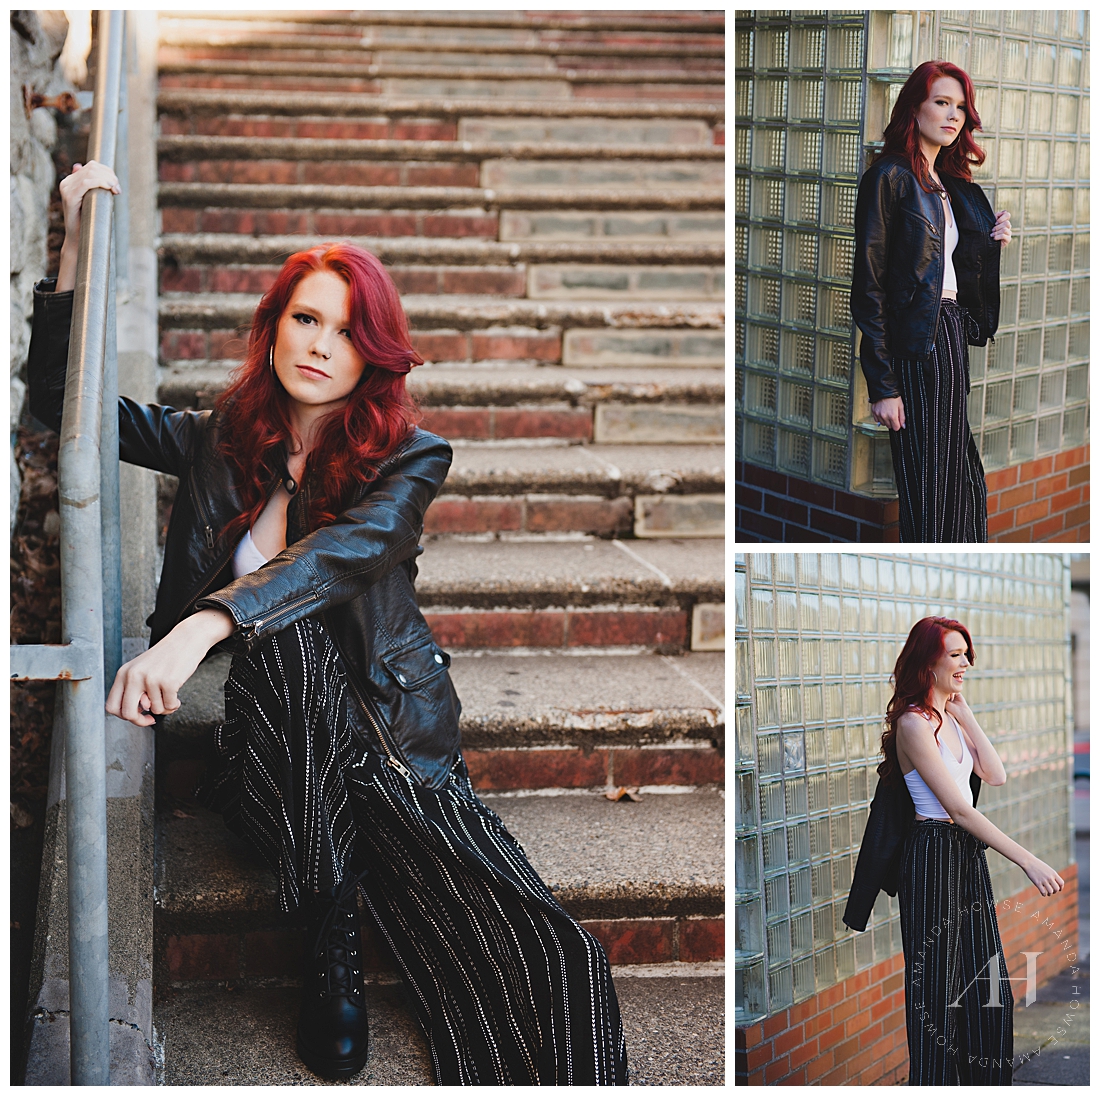 Urban Senior Portraits on Concrete Steps | Edgy, Grunge-Inspired Senior Portraits | Photographed by Tacoma's Best Senior Portrait Photographer Amanda Howse